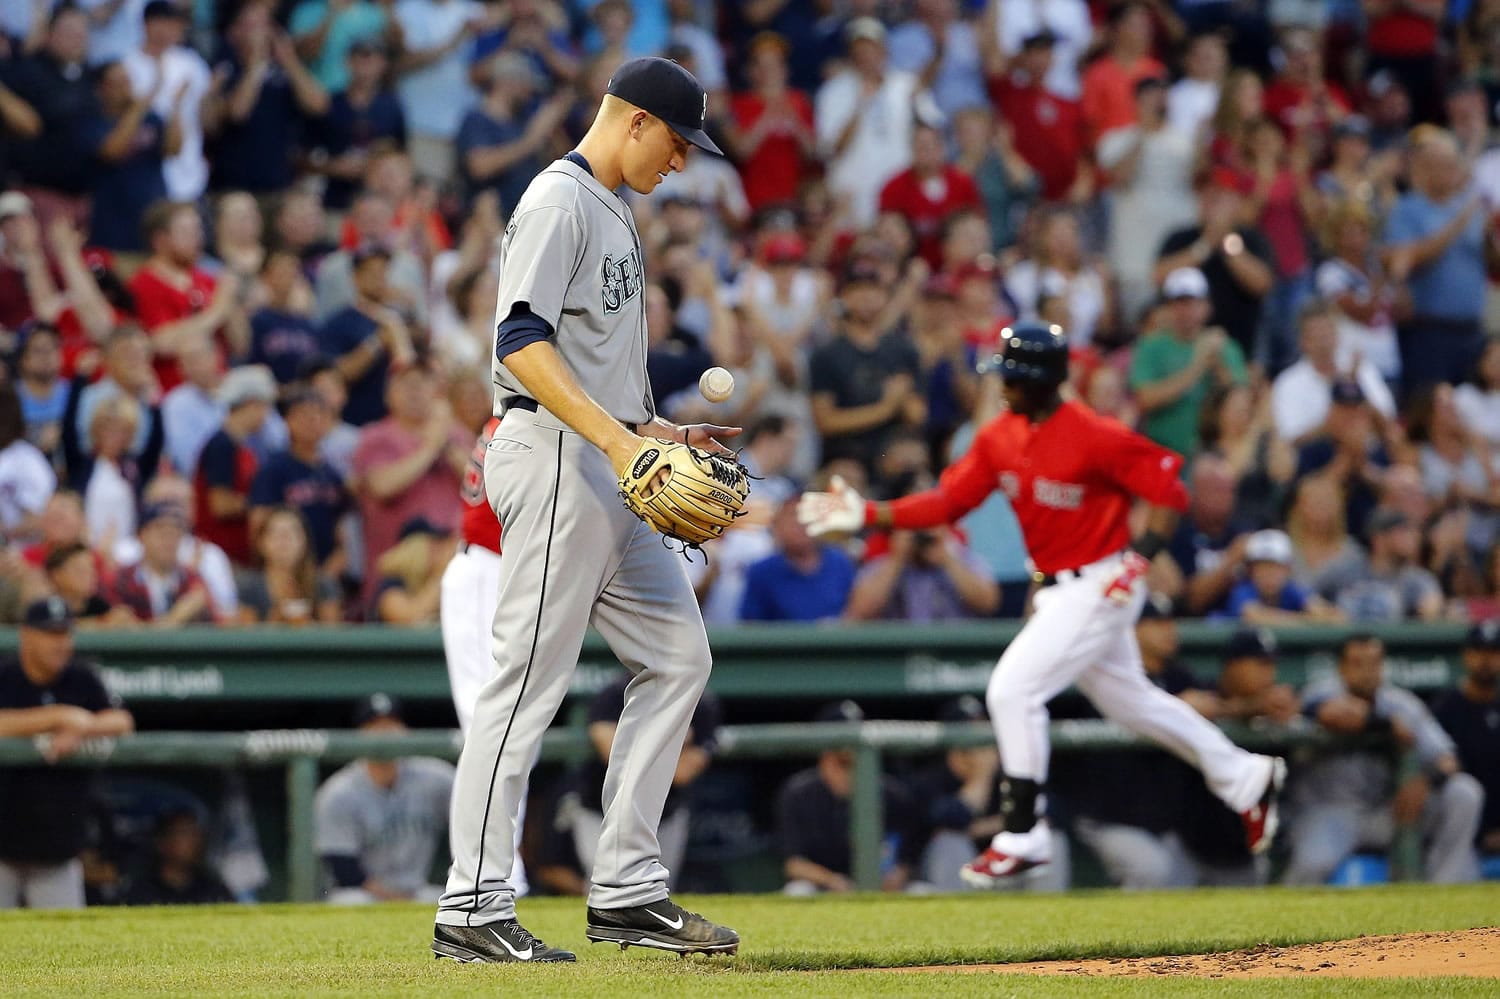 Seattle Mariners starting pitcher Mike Montgomery tosses a new ball in the air as Boston Red Sox's Rusney Castillo, right, rounds the bases after his two-run home run during the first inning at Fenway Park in Boston Friday, Aug. 14, 2015.